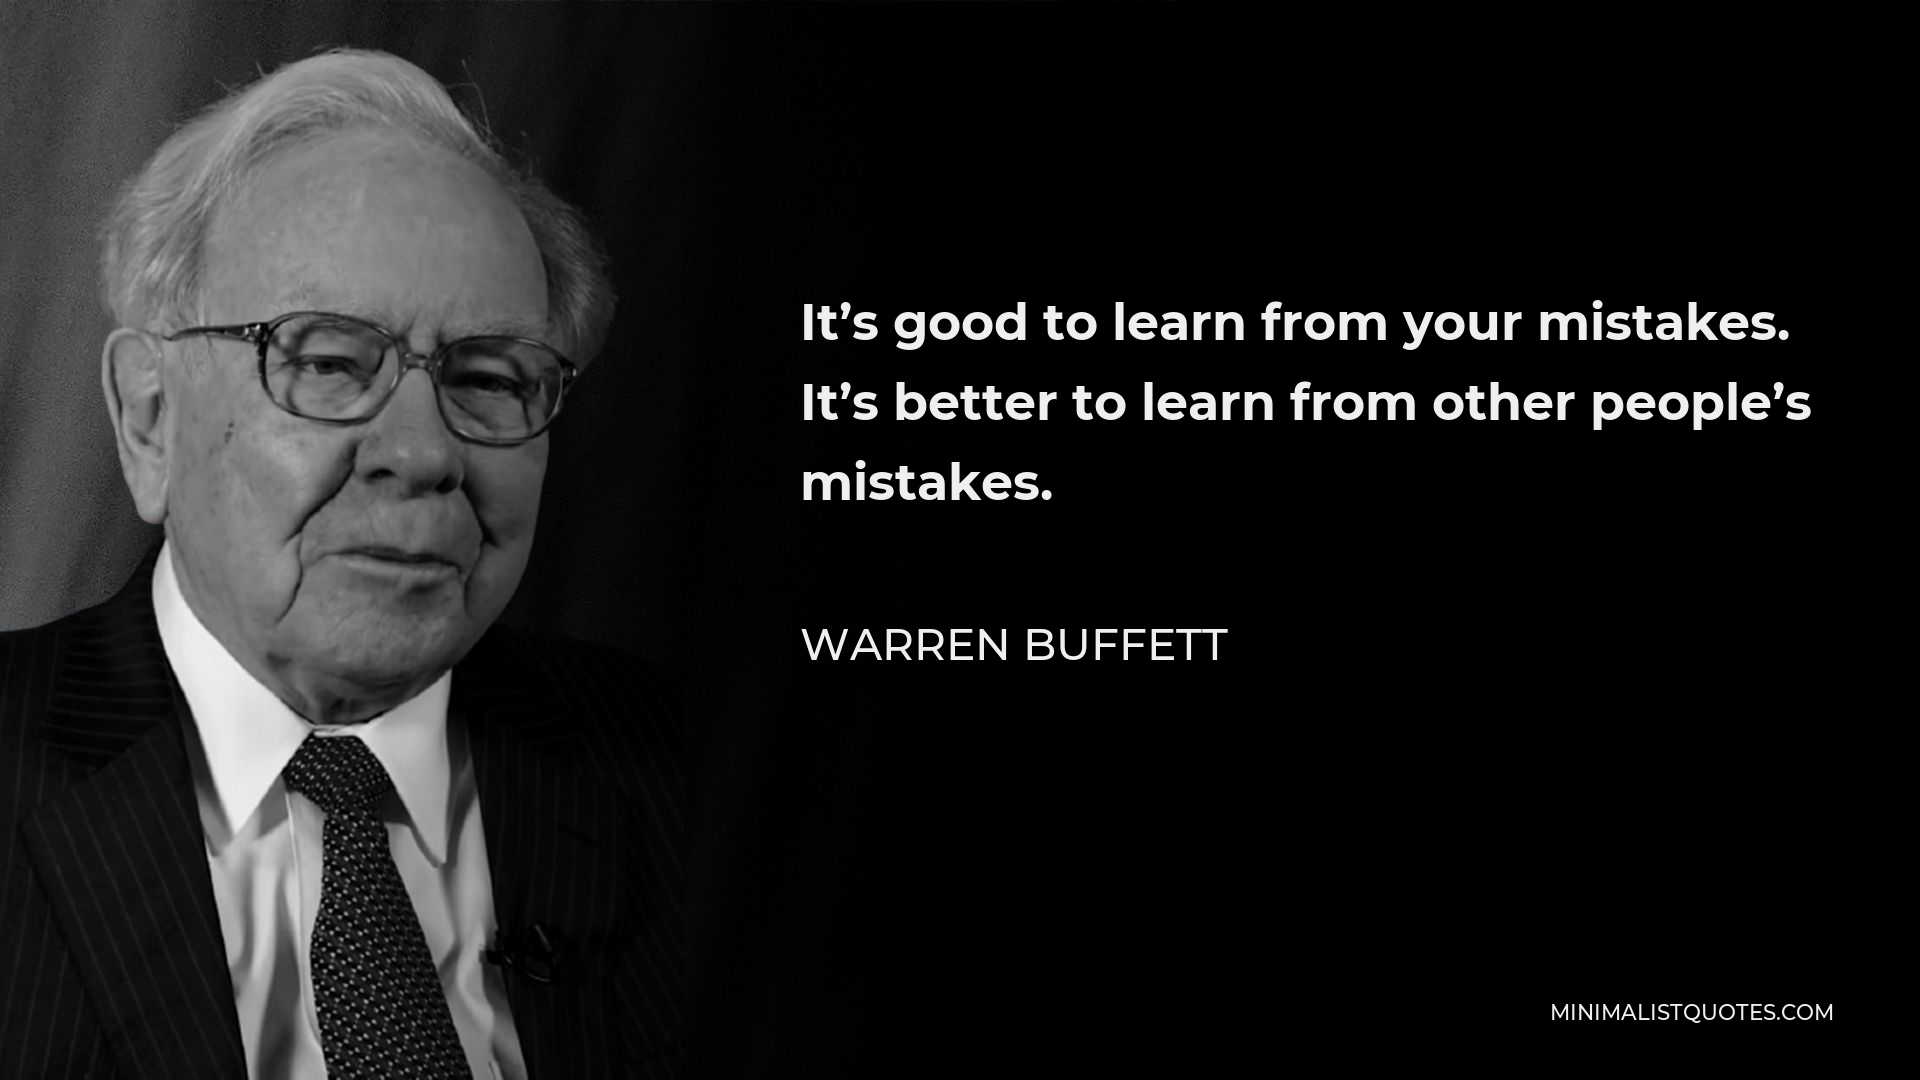 Warren Buffett Quote: “It's good to learn from your mistakes. It's